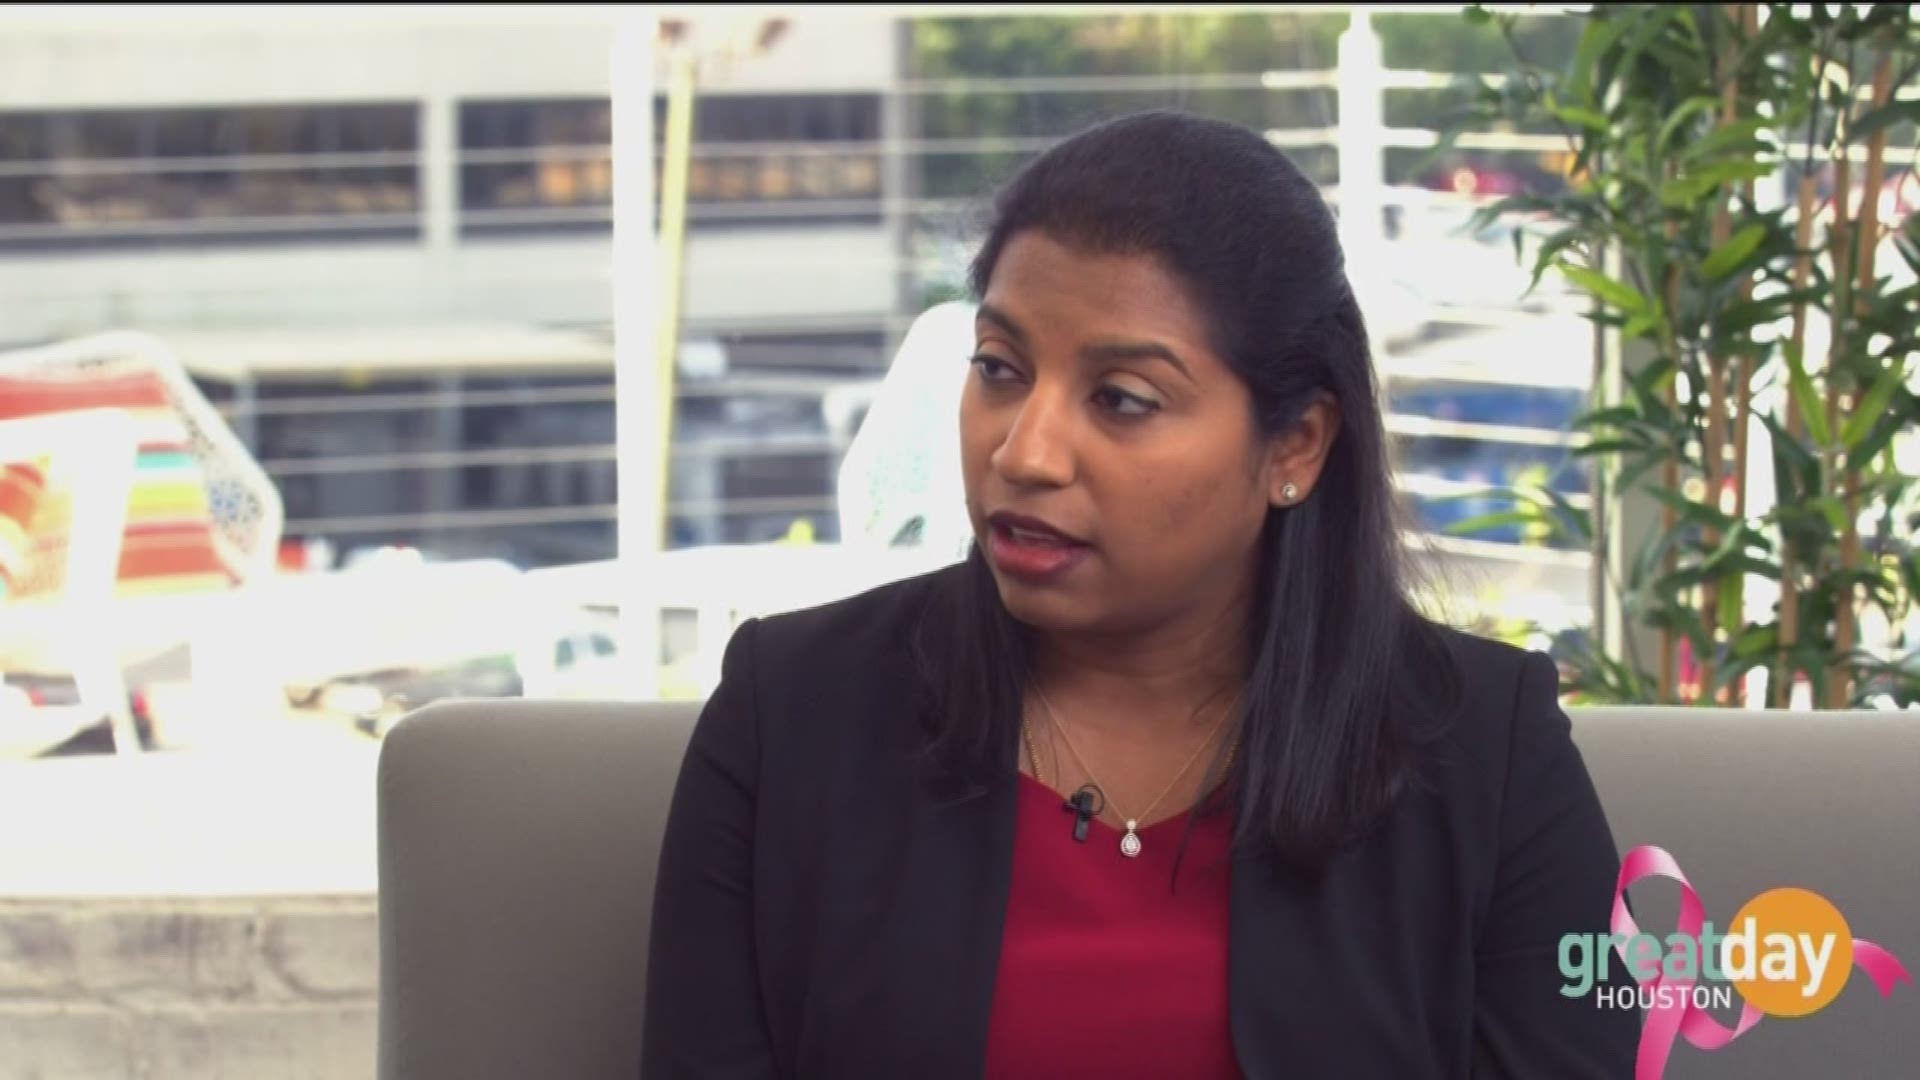 Dr. Priya Thomas with MD Anderson Cancer Center talks about the signs and symptoms of breast cancer.